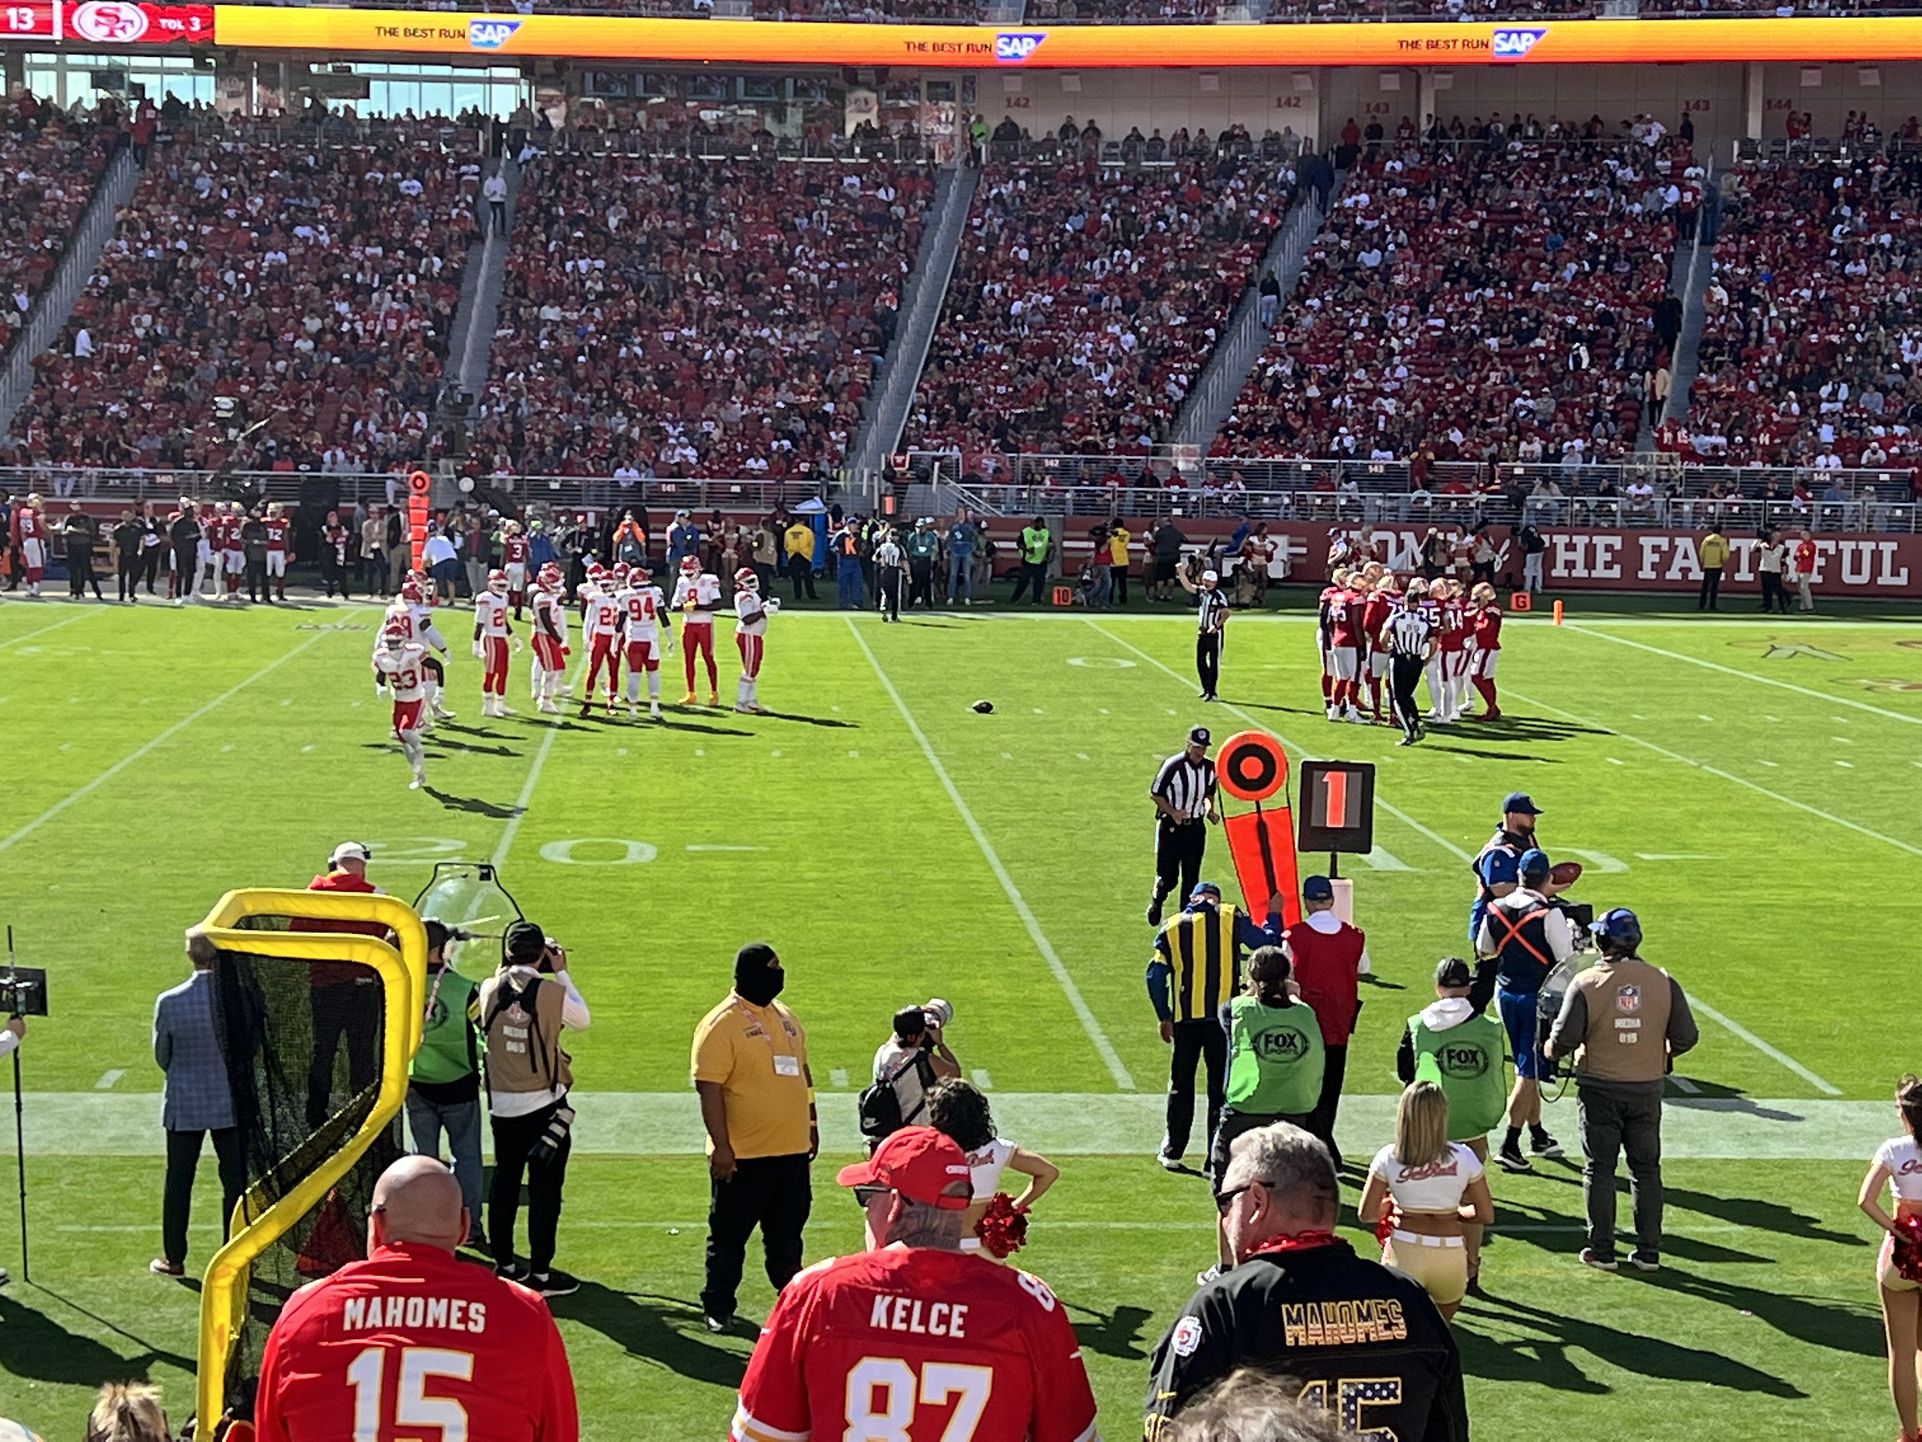 49ers vs. Dolphins - Section 111 Row 9 - Red Zone 2 Tickets $410 Each  OBO